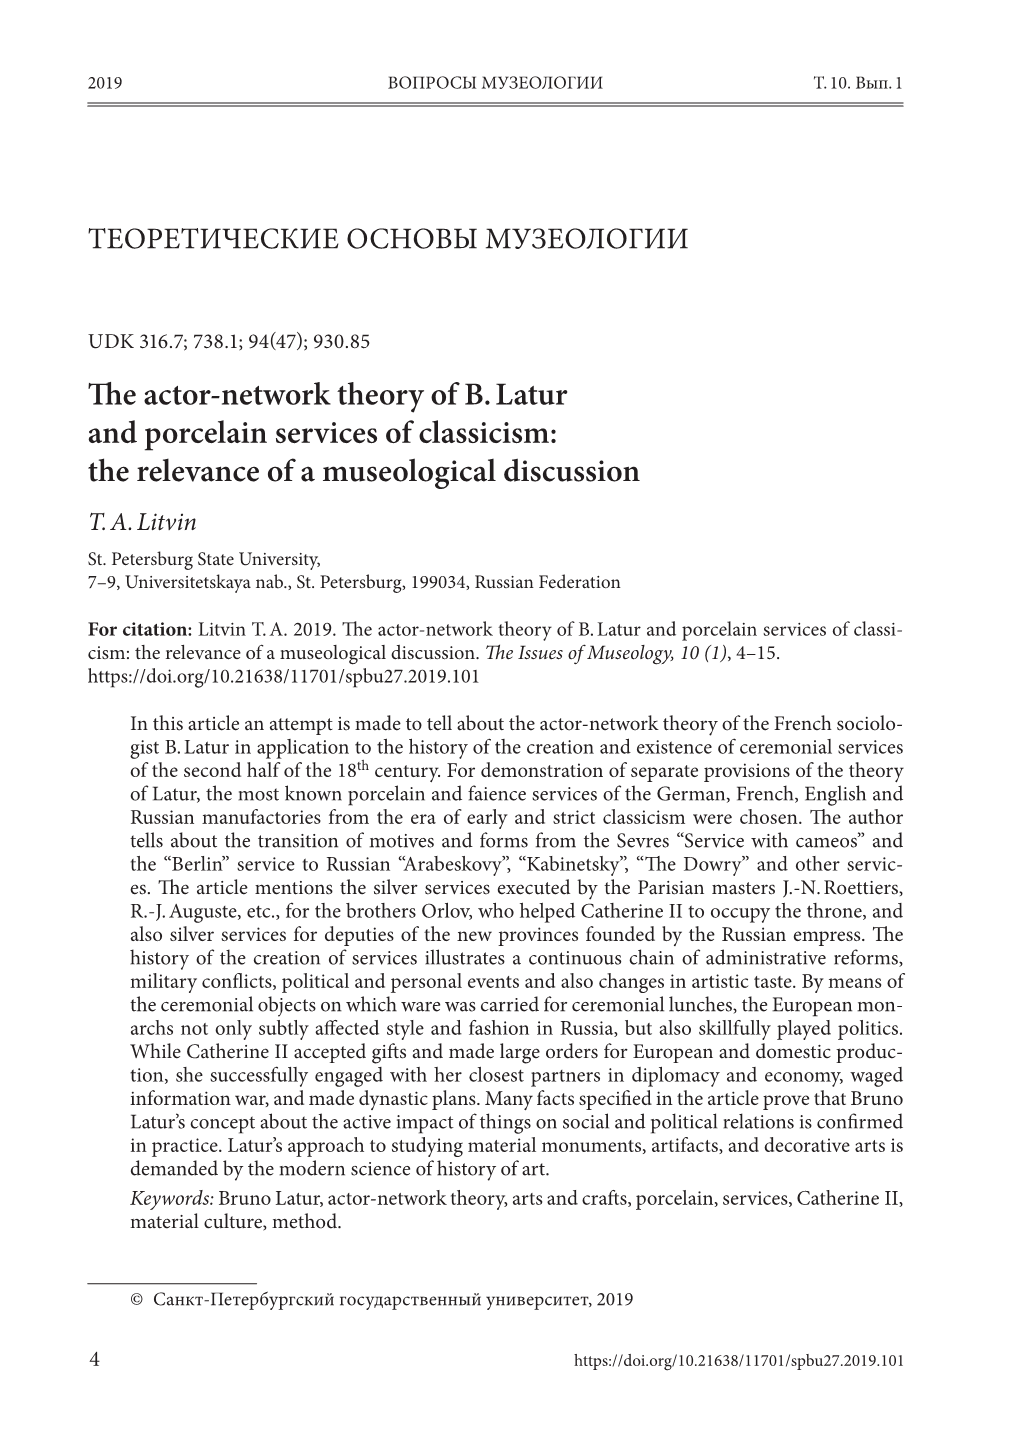 The Actor-Network Theory of B. Latur and Porcelain Services of Classicism: the Relevance of a Museological Discussion T